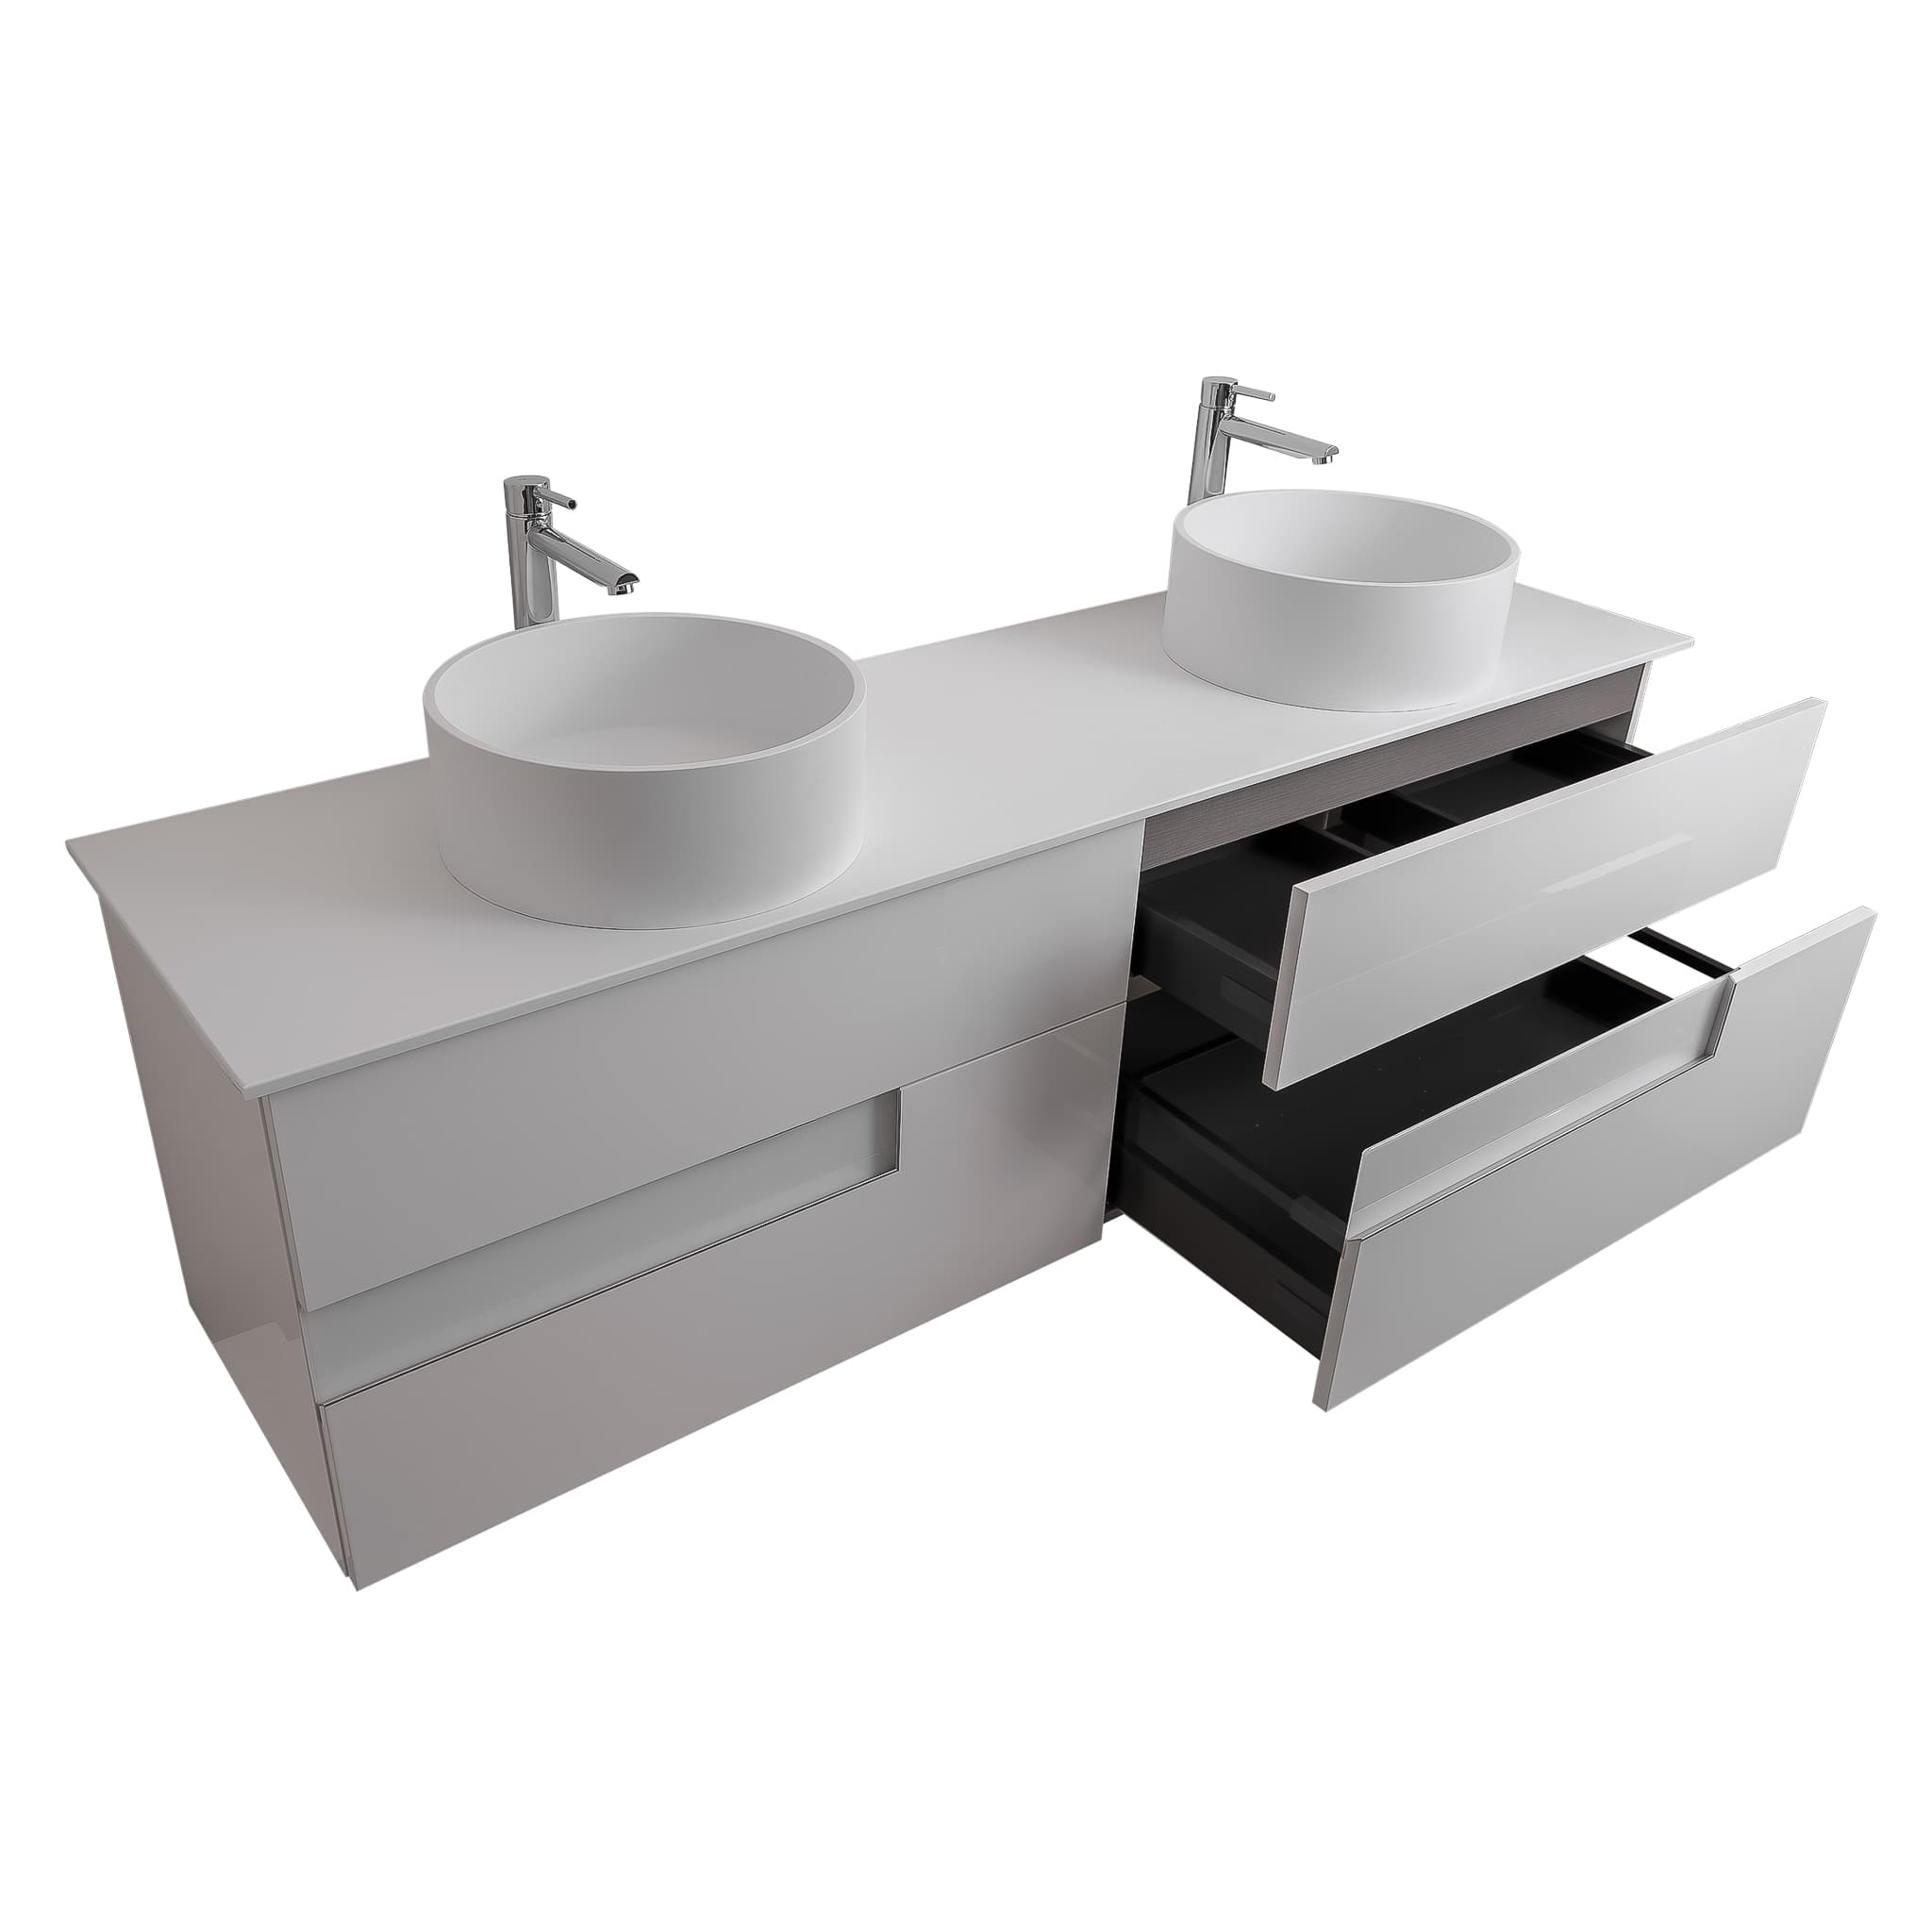 Vision 72 White High Gloss Cabinet, Solid Surface Flat White Counter And Two Round Solid Surface White Basin 1386, Wall Mounted Modern Vanity Set